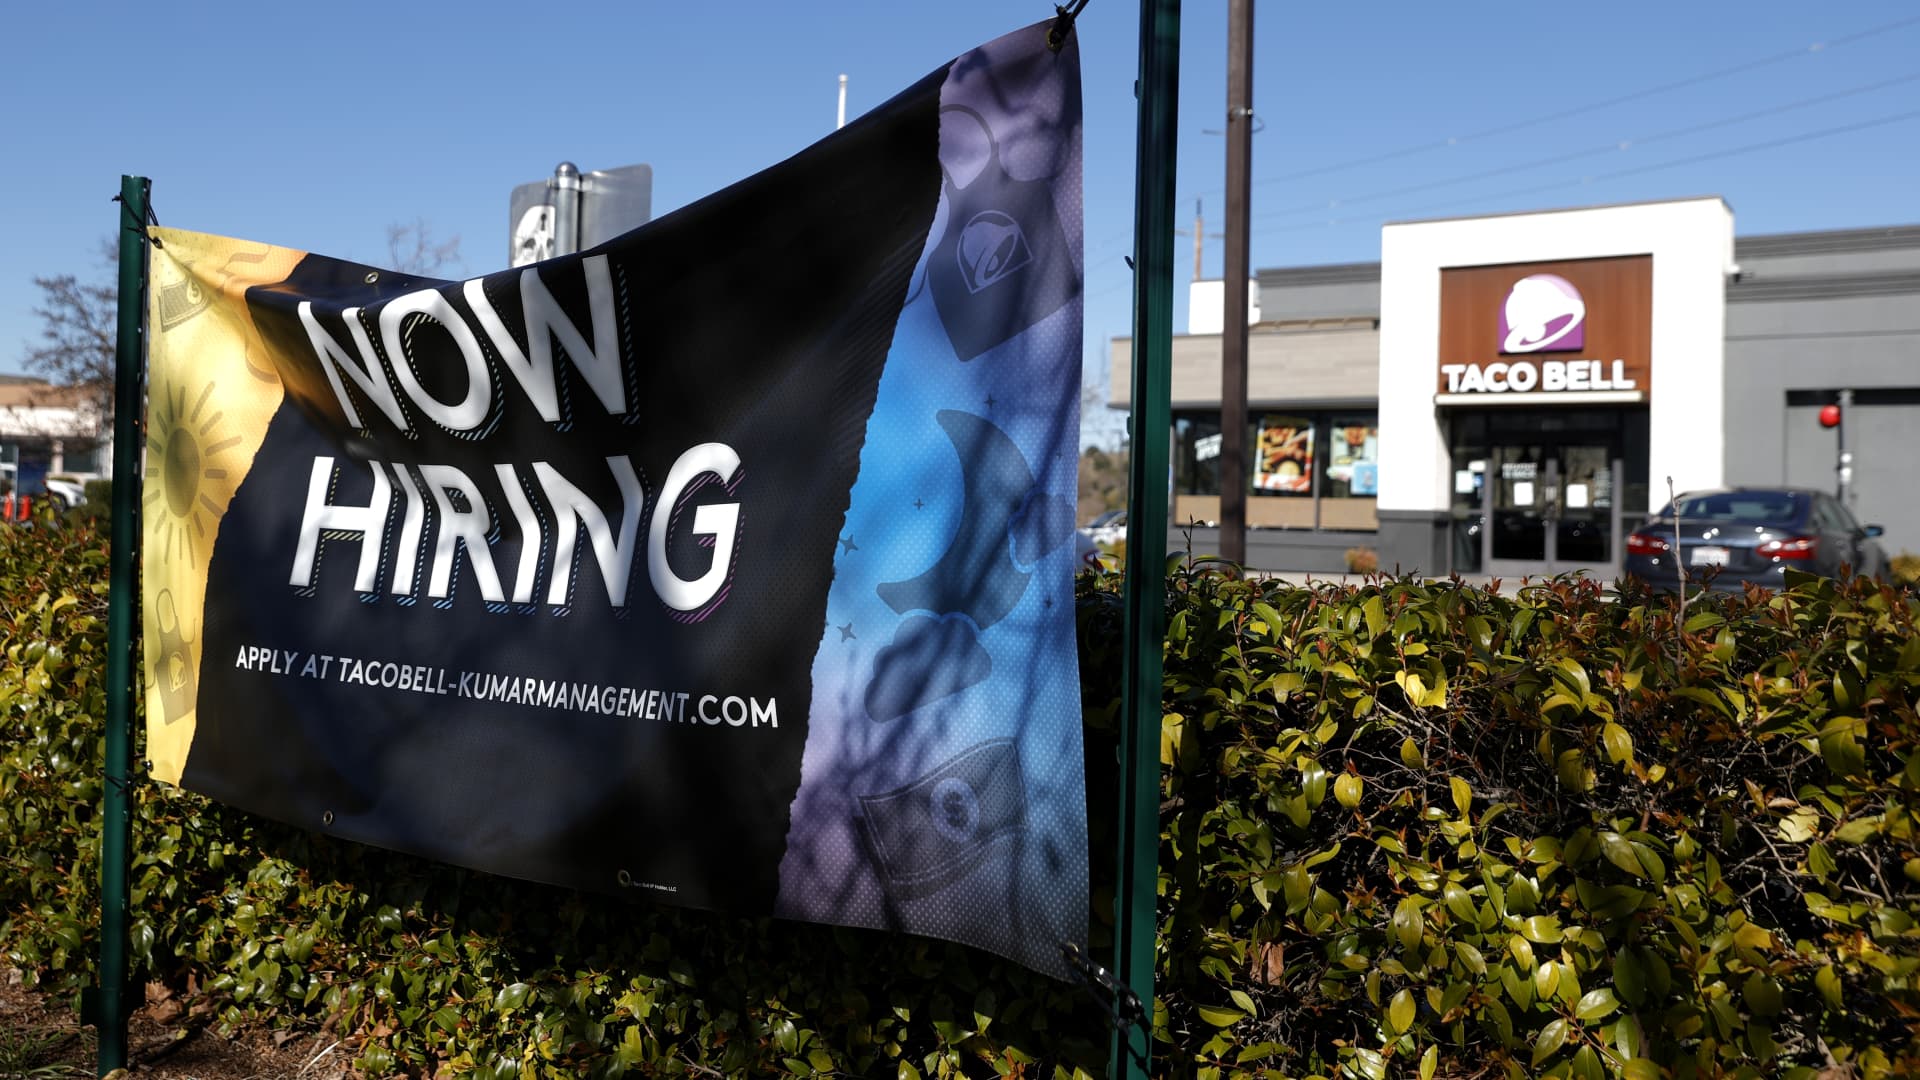 A Now Hiring sign is posted in front of a Taco Bell restaurant on February 05, 2021 in Novato, California.